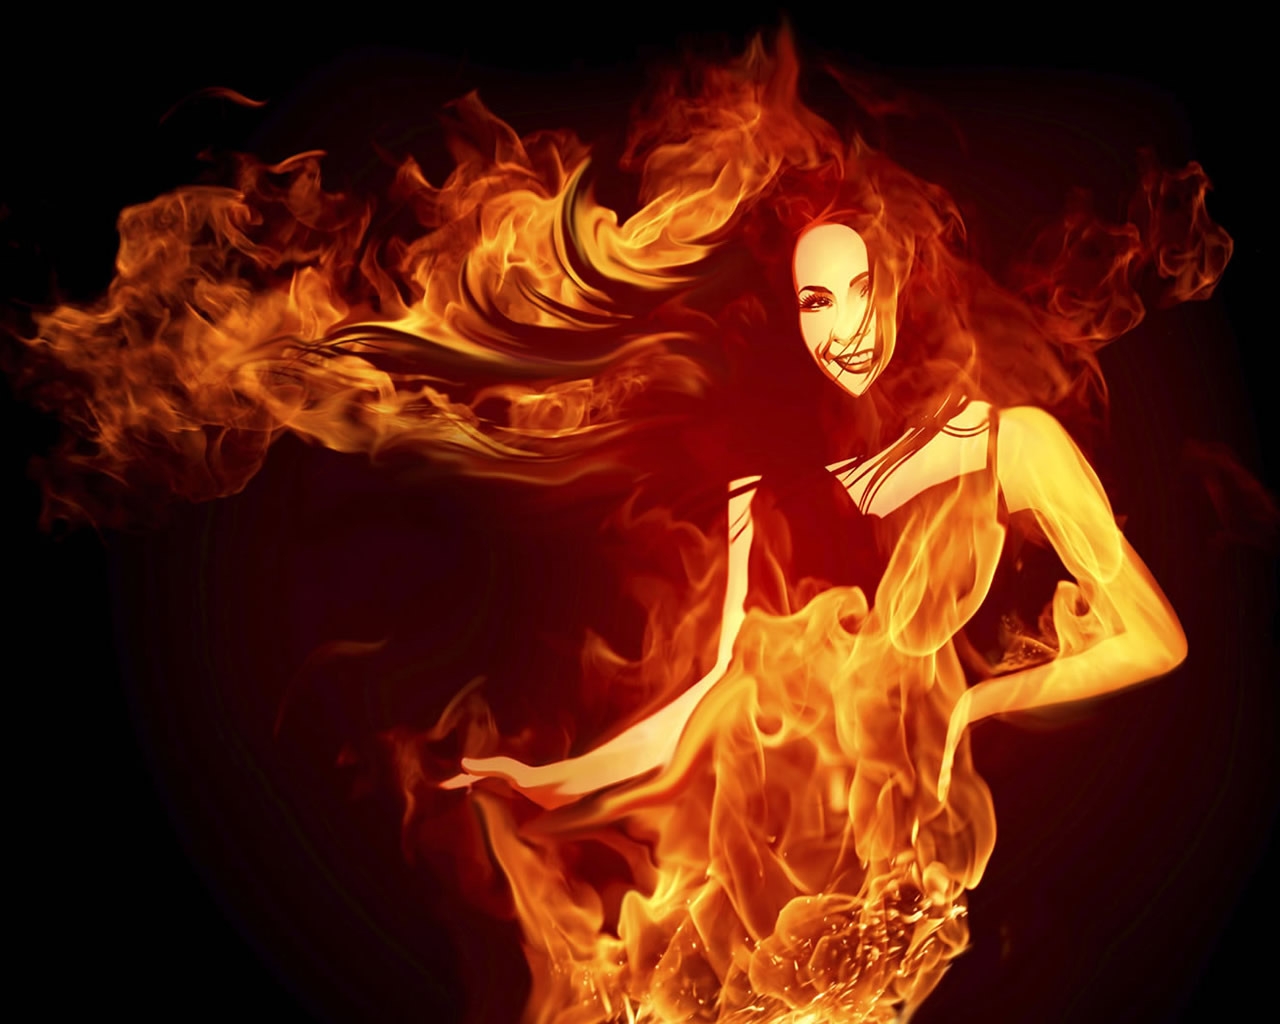 Woman in Fire for 1280 x 1024 resolution